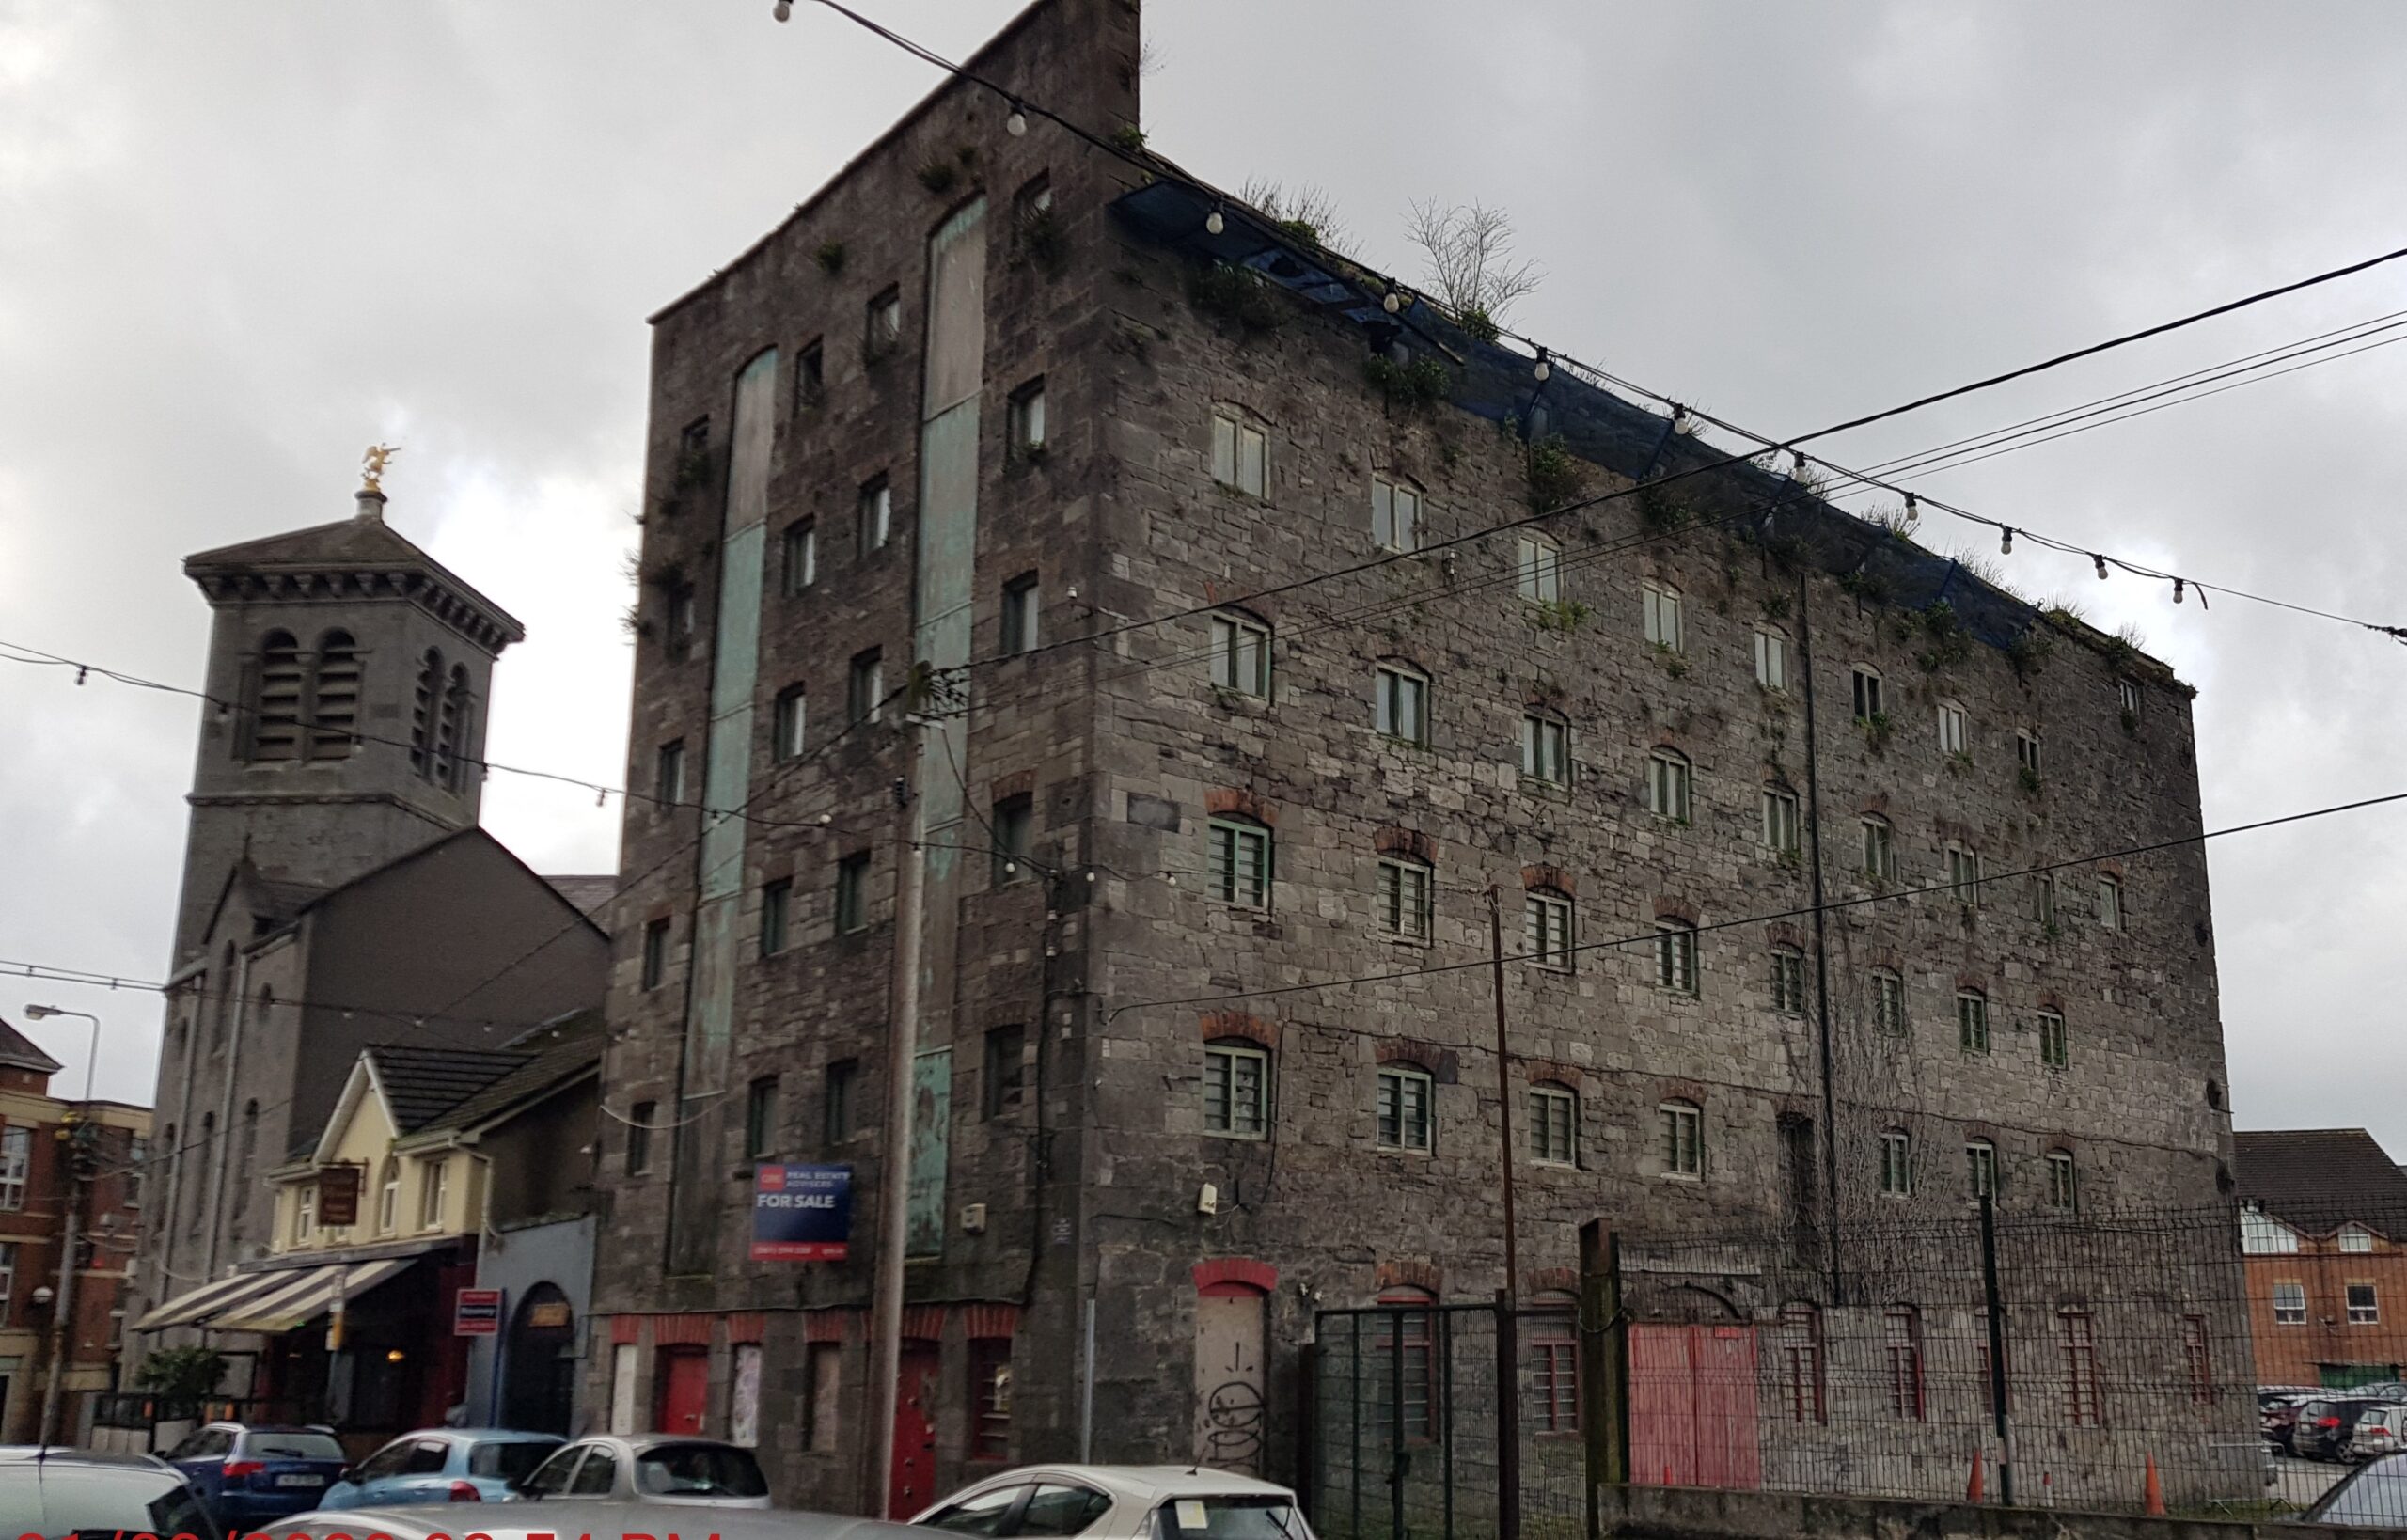 lccc to compulsorily acquire a further 23 derelict properties including a six storey former mill building on Robert Street, Limerick.